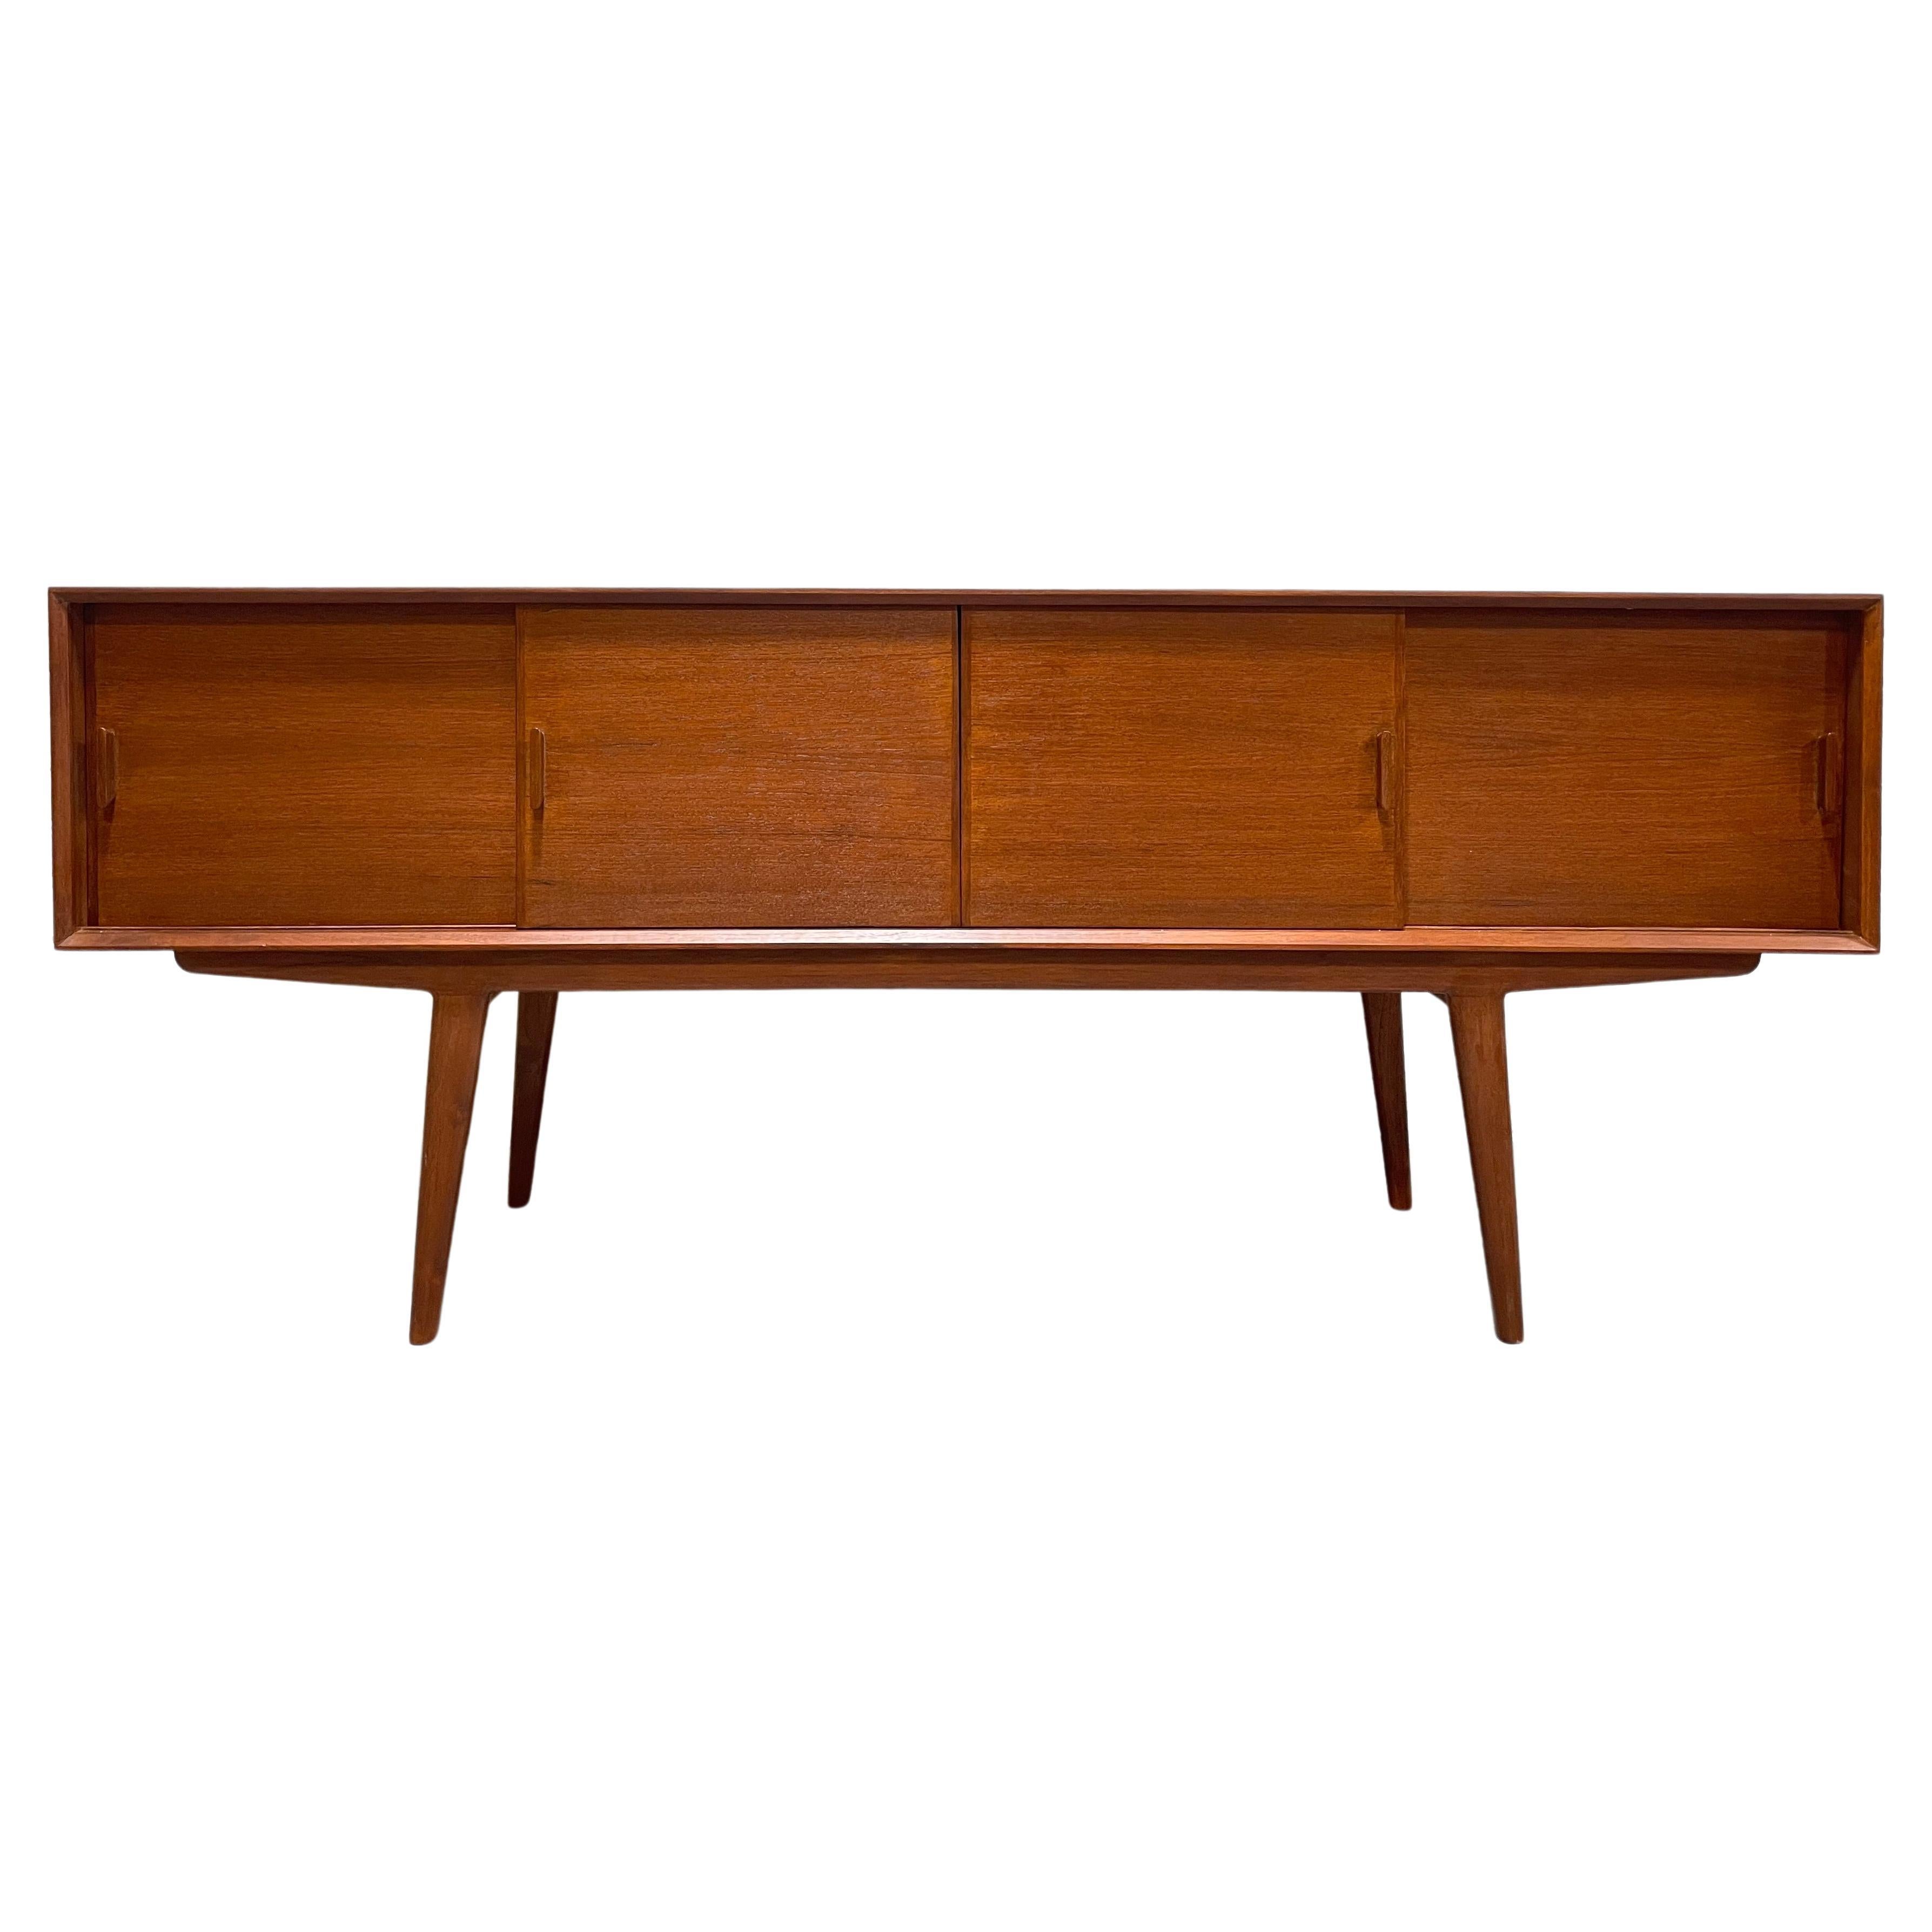 LONG + Sleek Handmade Mid Century MODERN styled CREDENZA media stand For Sale